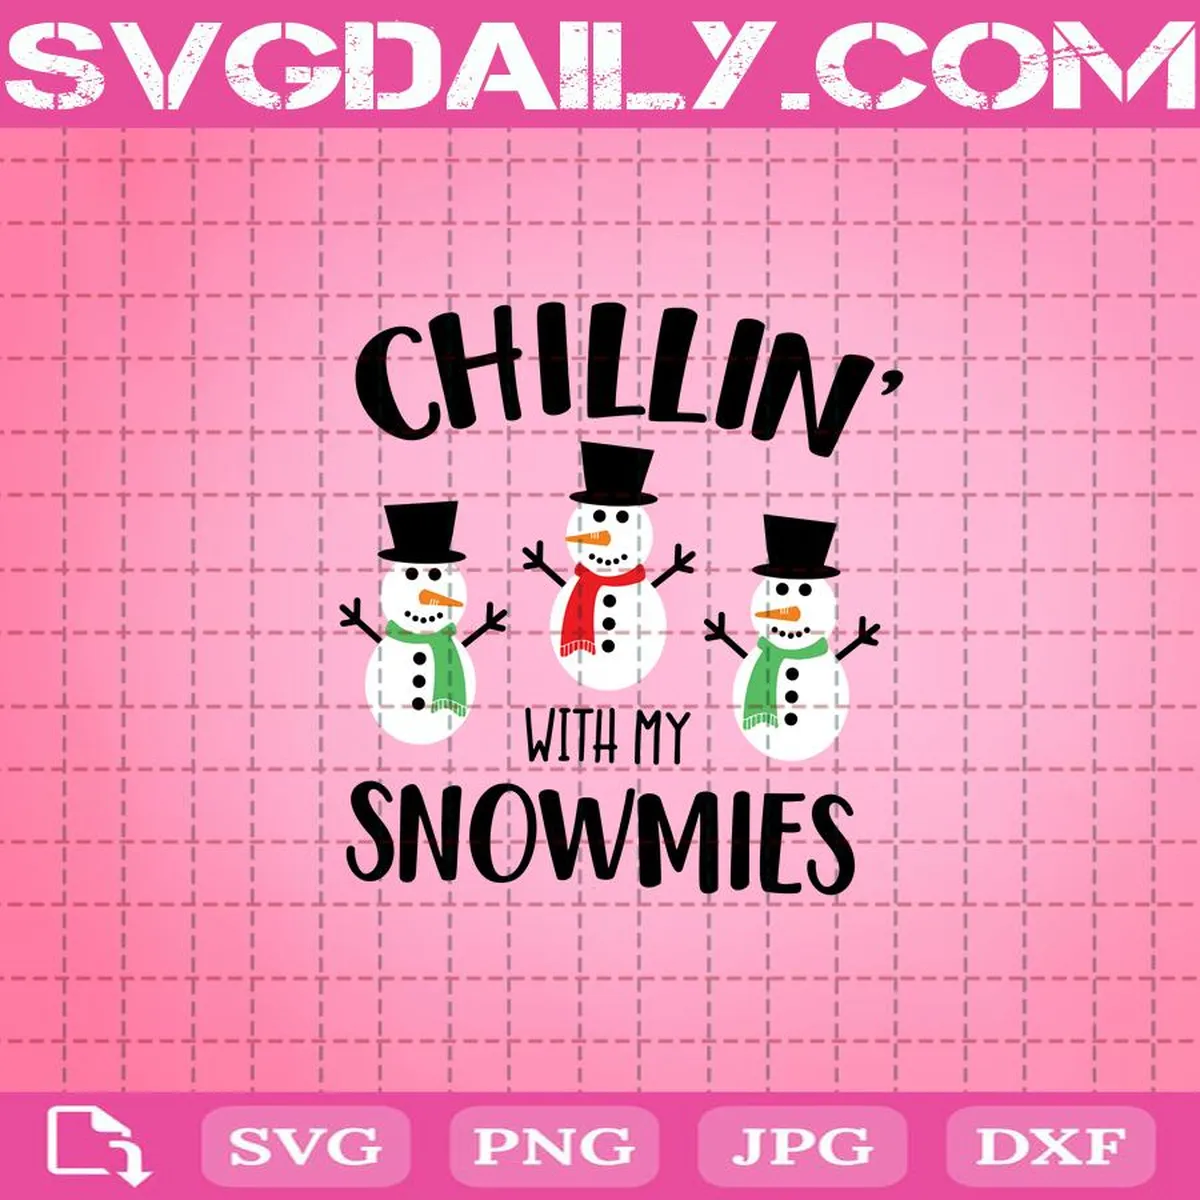 Chillin’ With My Snowmies Svg, Snowman Svg, Kids Christmas Svg, Boy Holidays Svg, Snow Cute Svg, Svg Png Eps Dxf